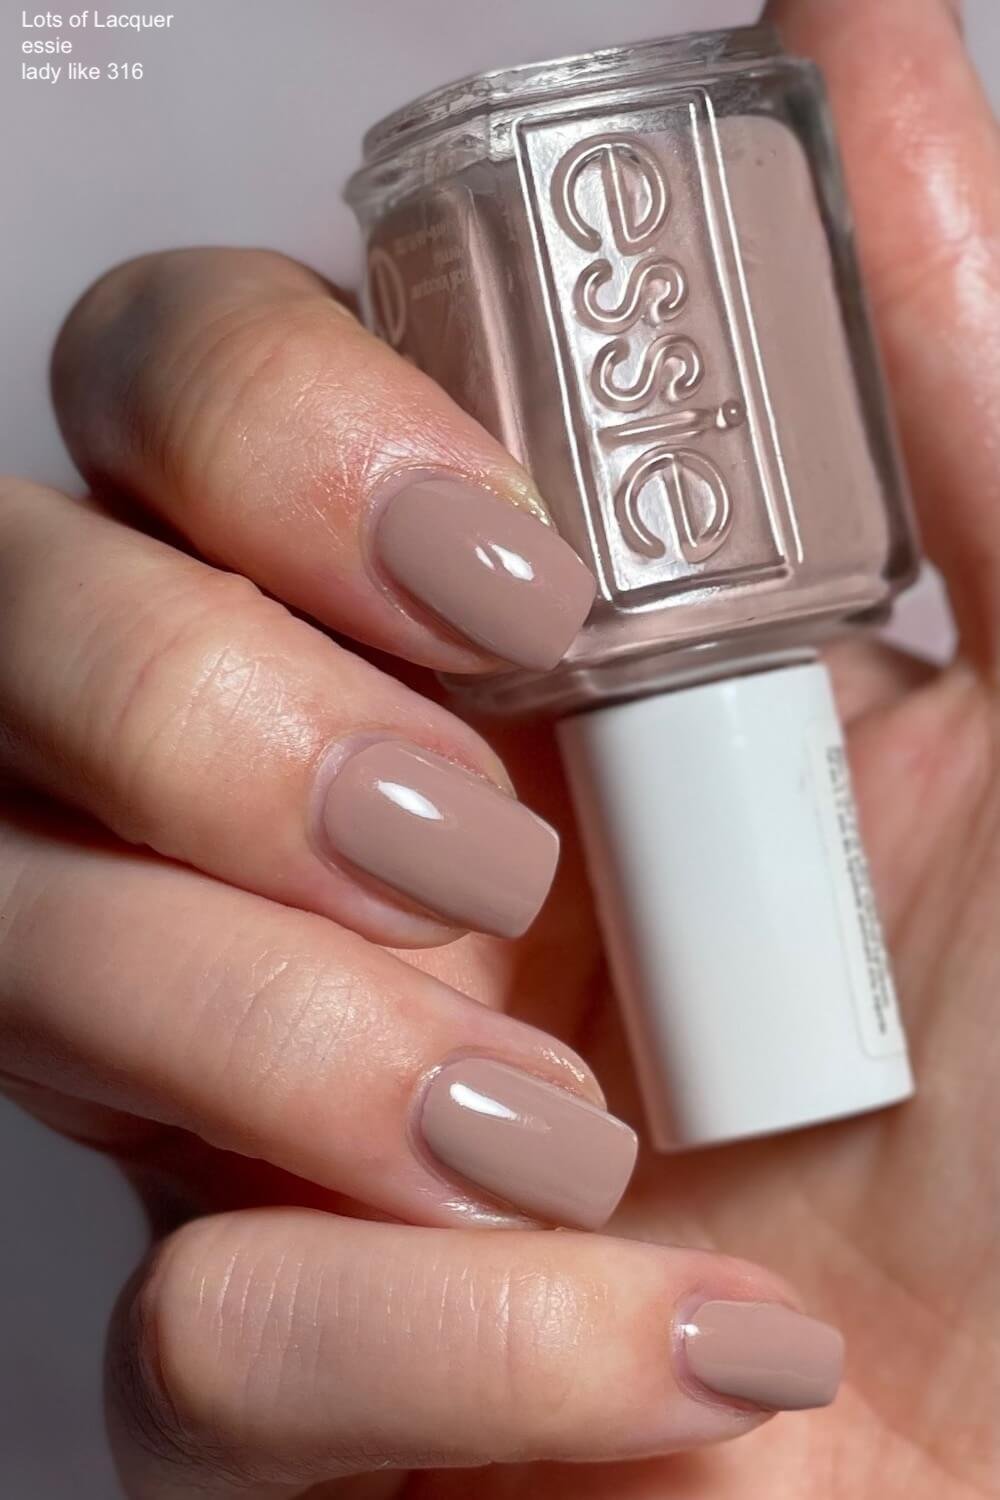 Anyone else wear the same color nail polish all the time or is it just me  😅 this has been my go to color for years. Essie Lady Like if… | Instagram